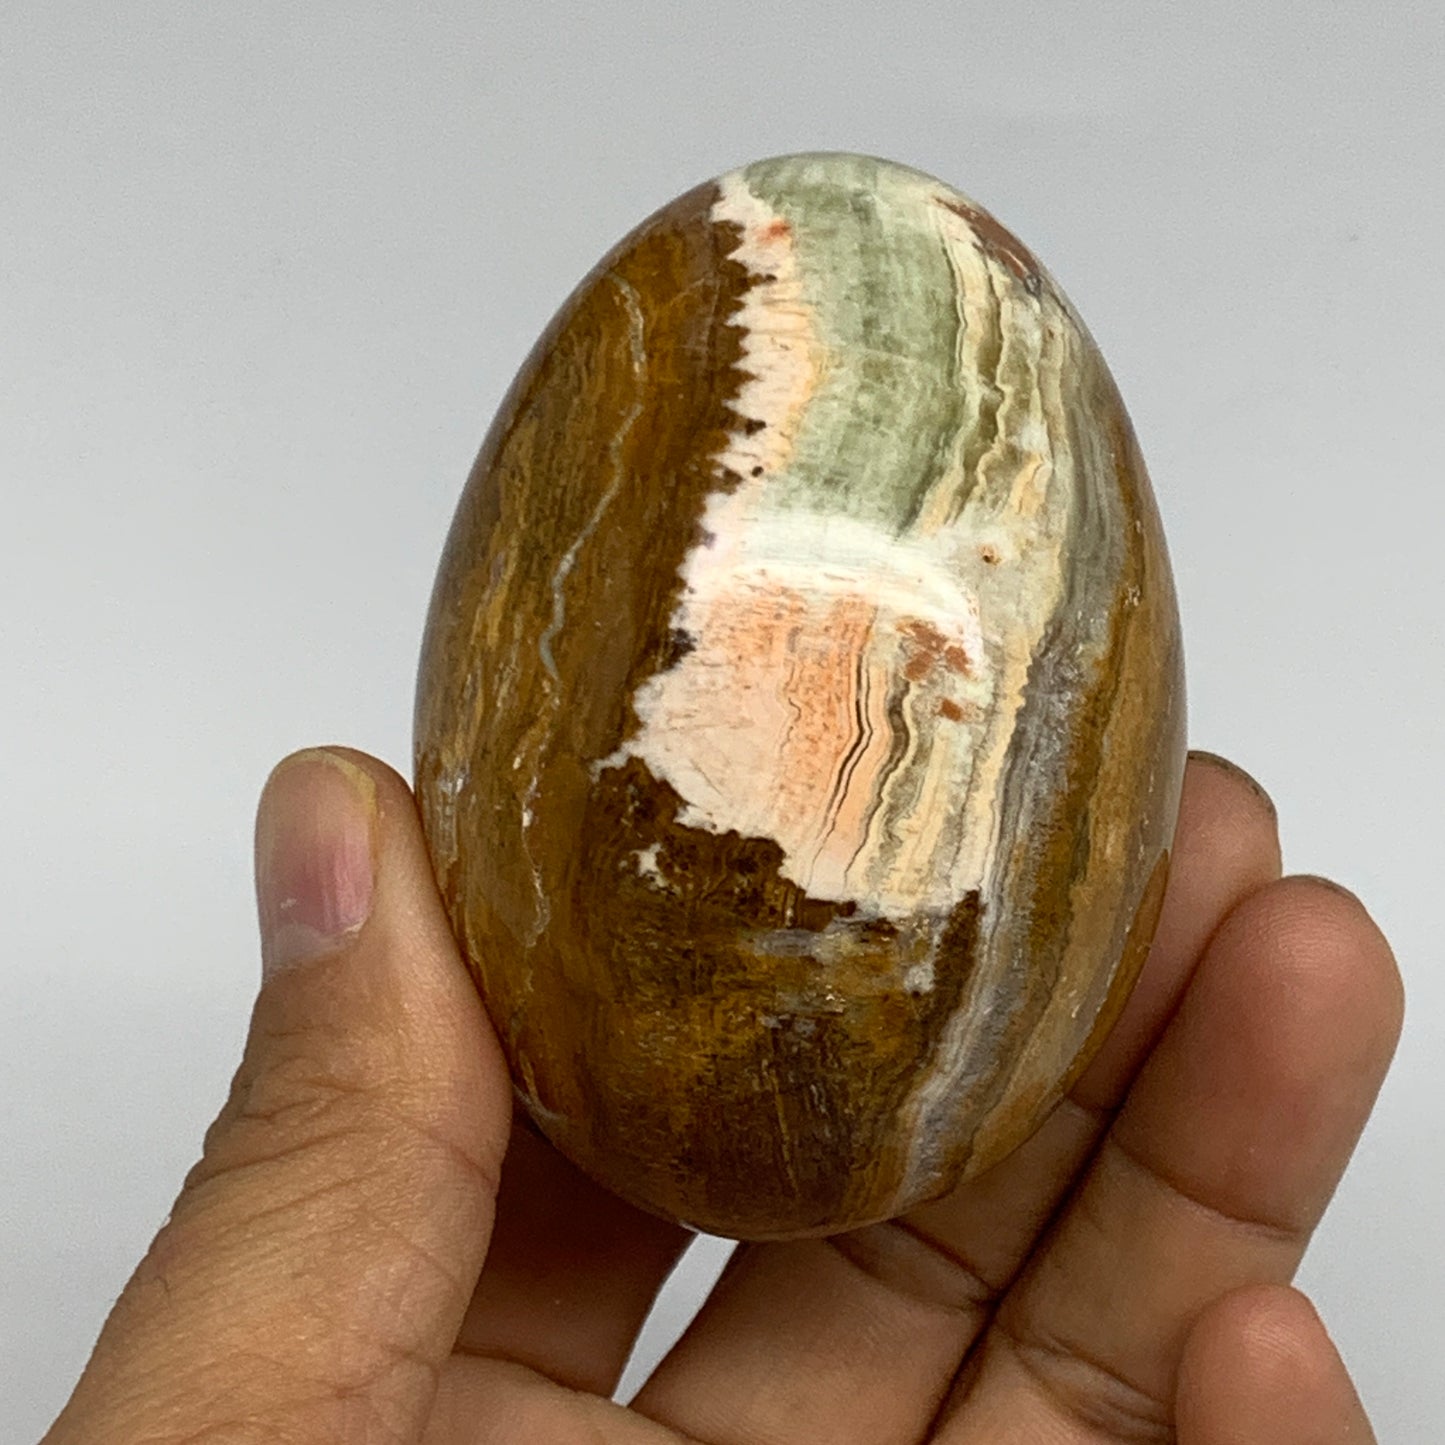 249g, 2.8"x2" Natural Green Onyx Egg Gemstone Mineral, from Pakistan, B32037